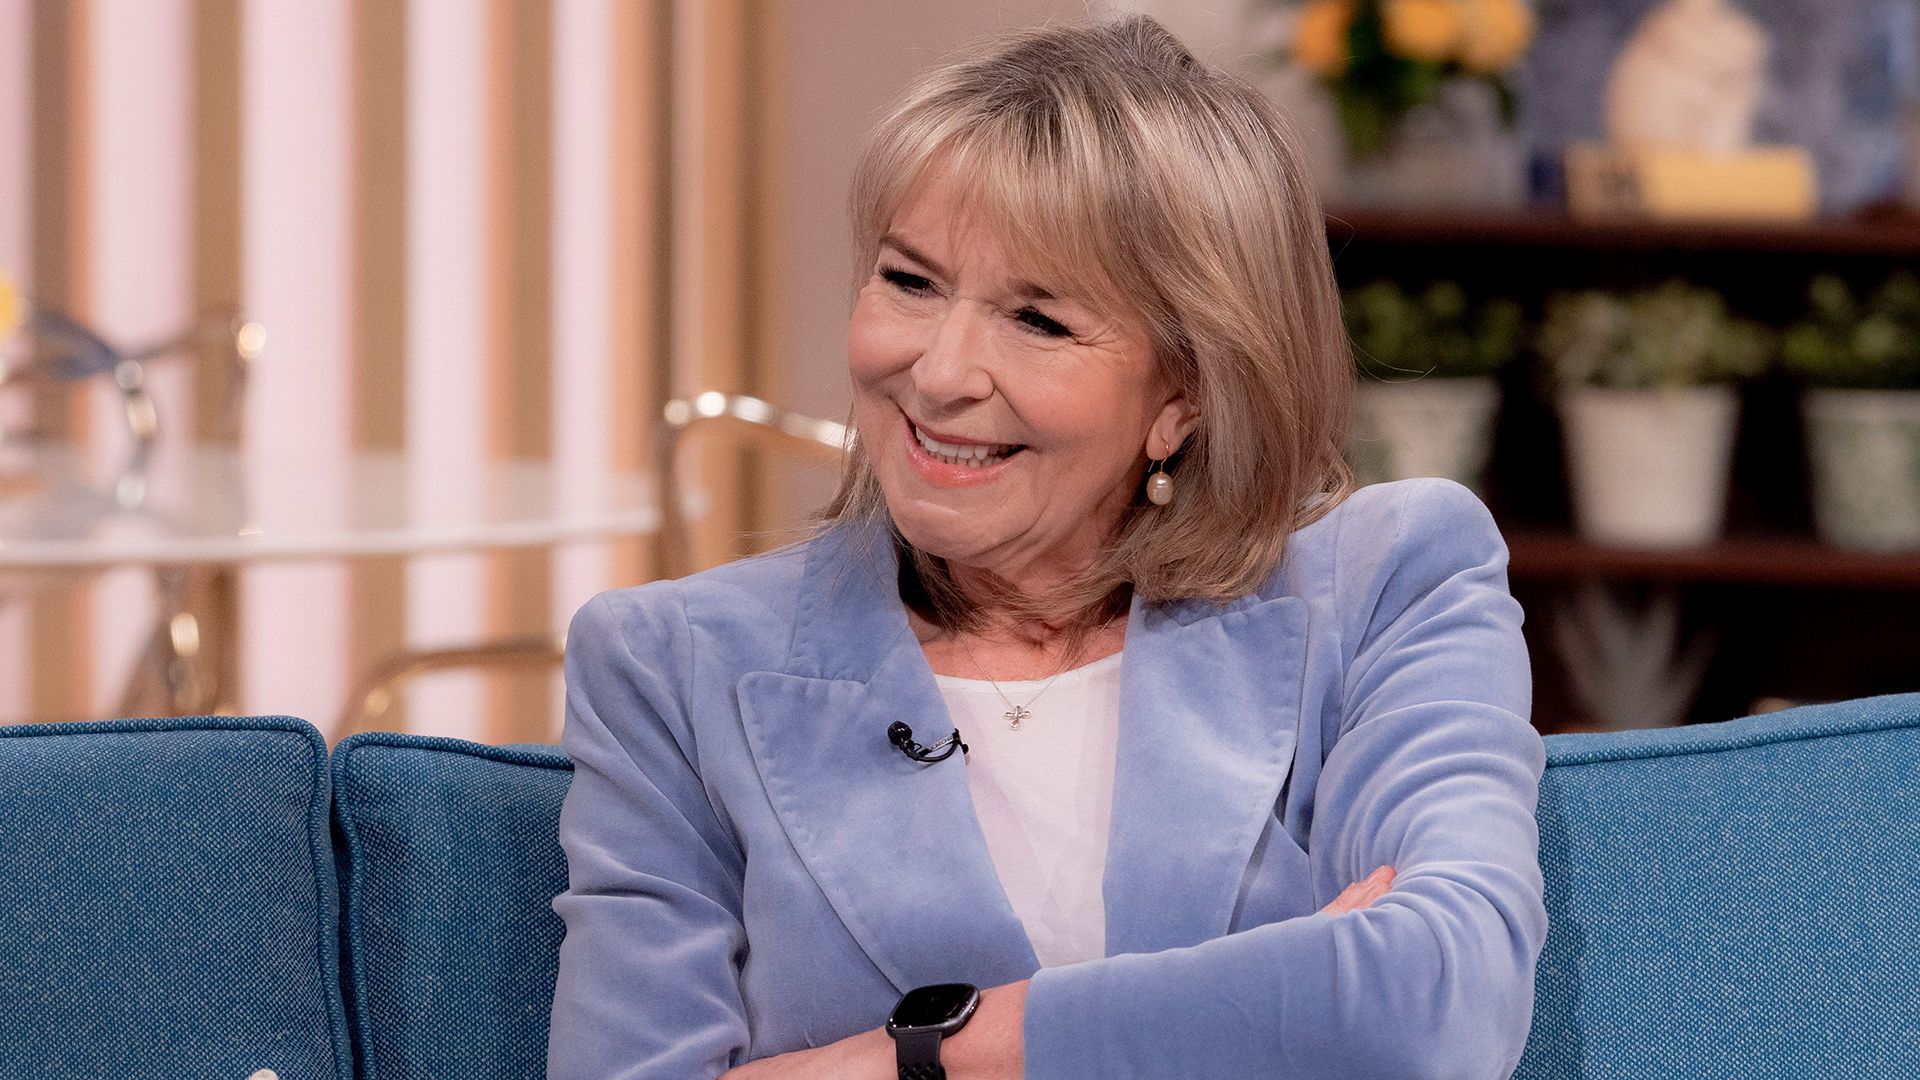 Fern Britton makes surprise return to This Morning 15 years after her departure